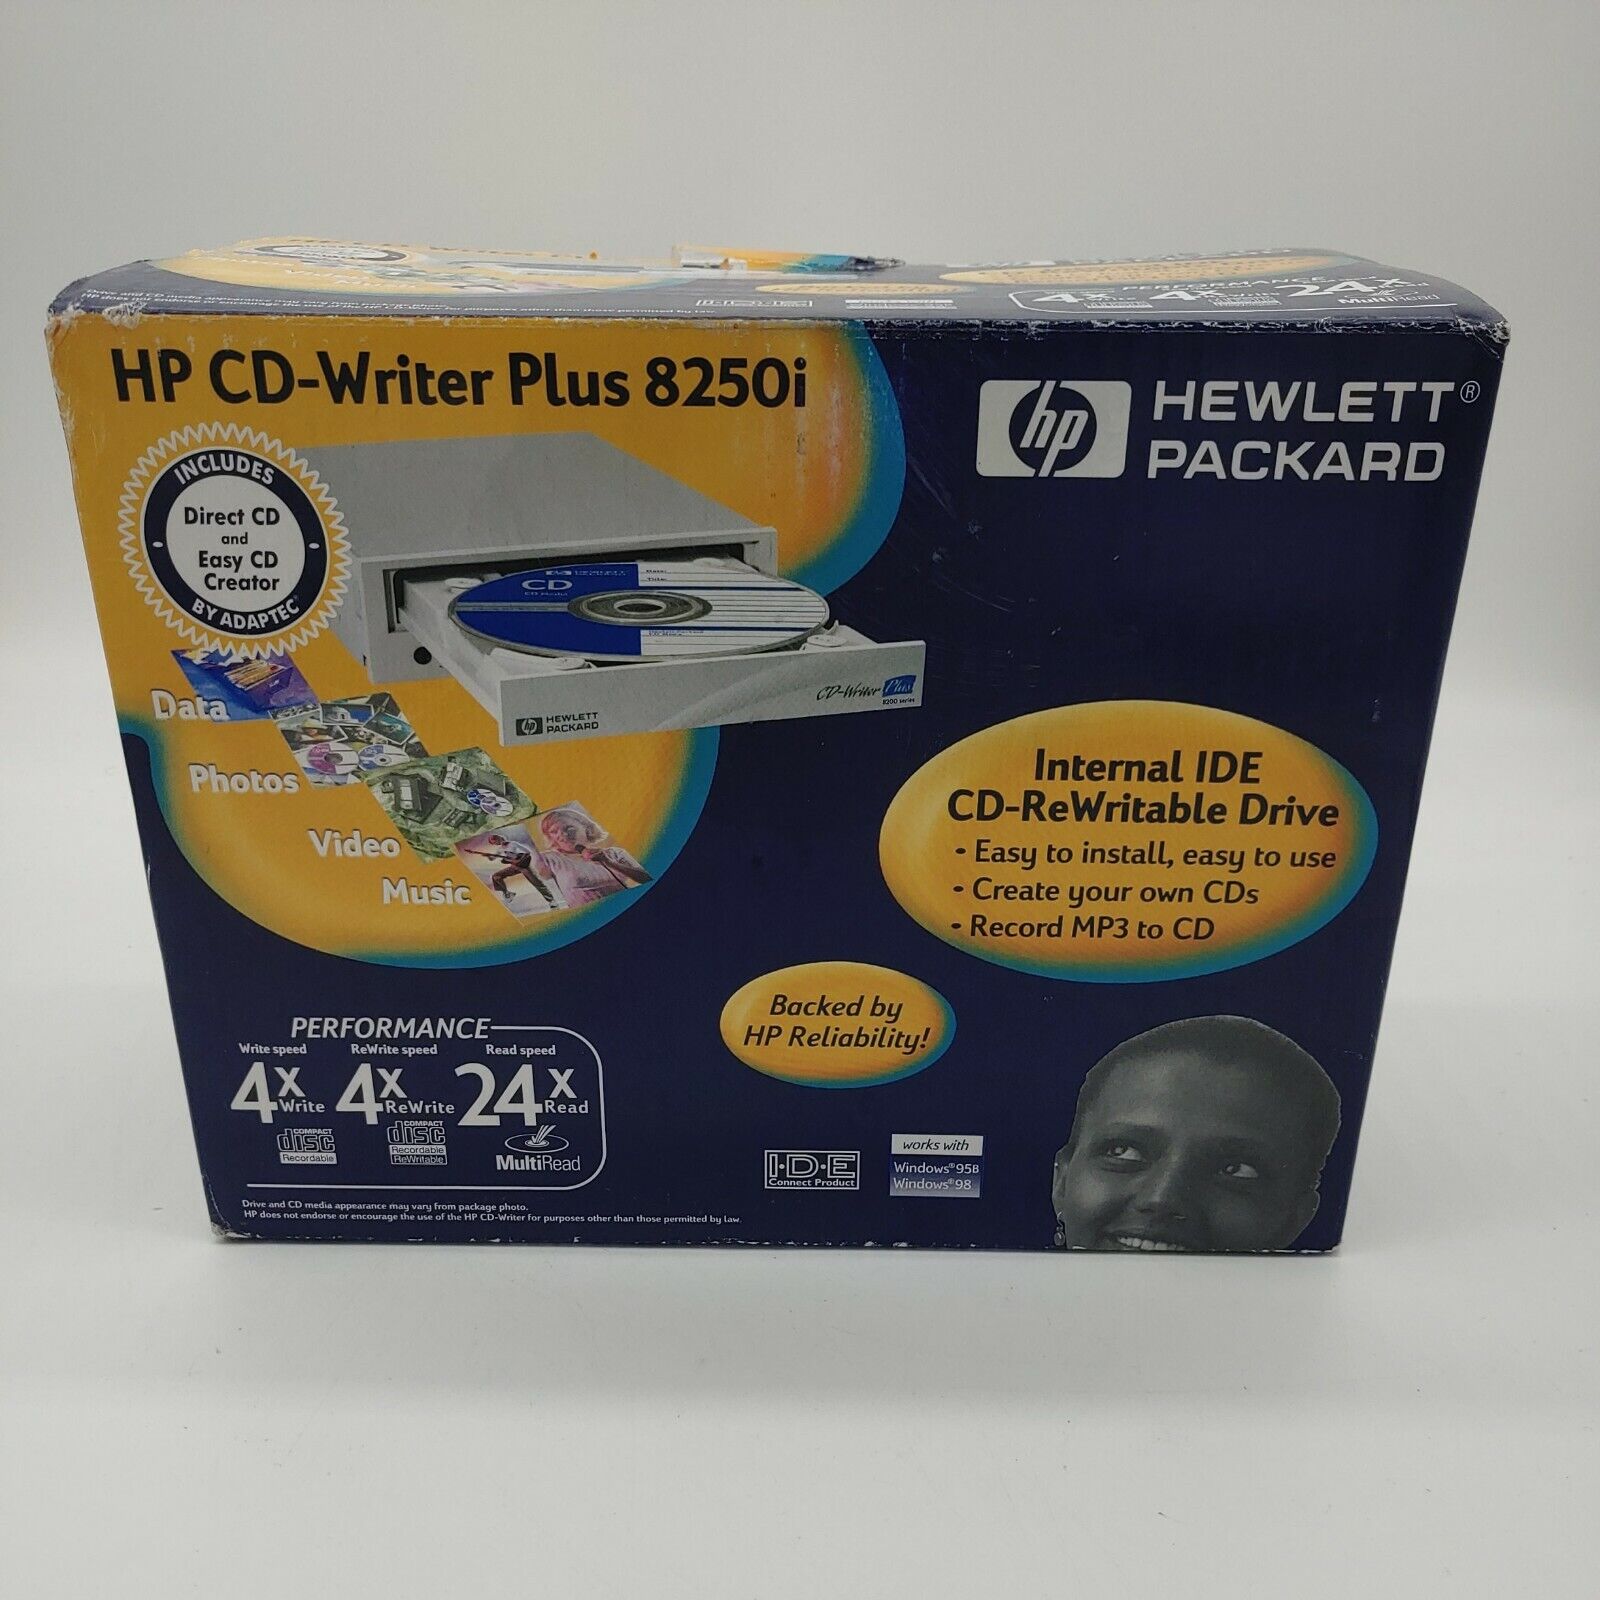 Open Box Vintage Hewlett Packard HP CD-Writer Plus 8250i Never Used